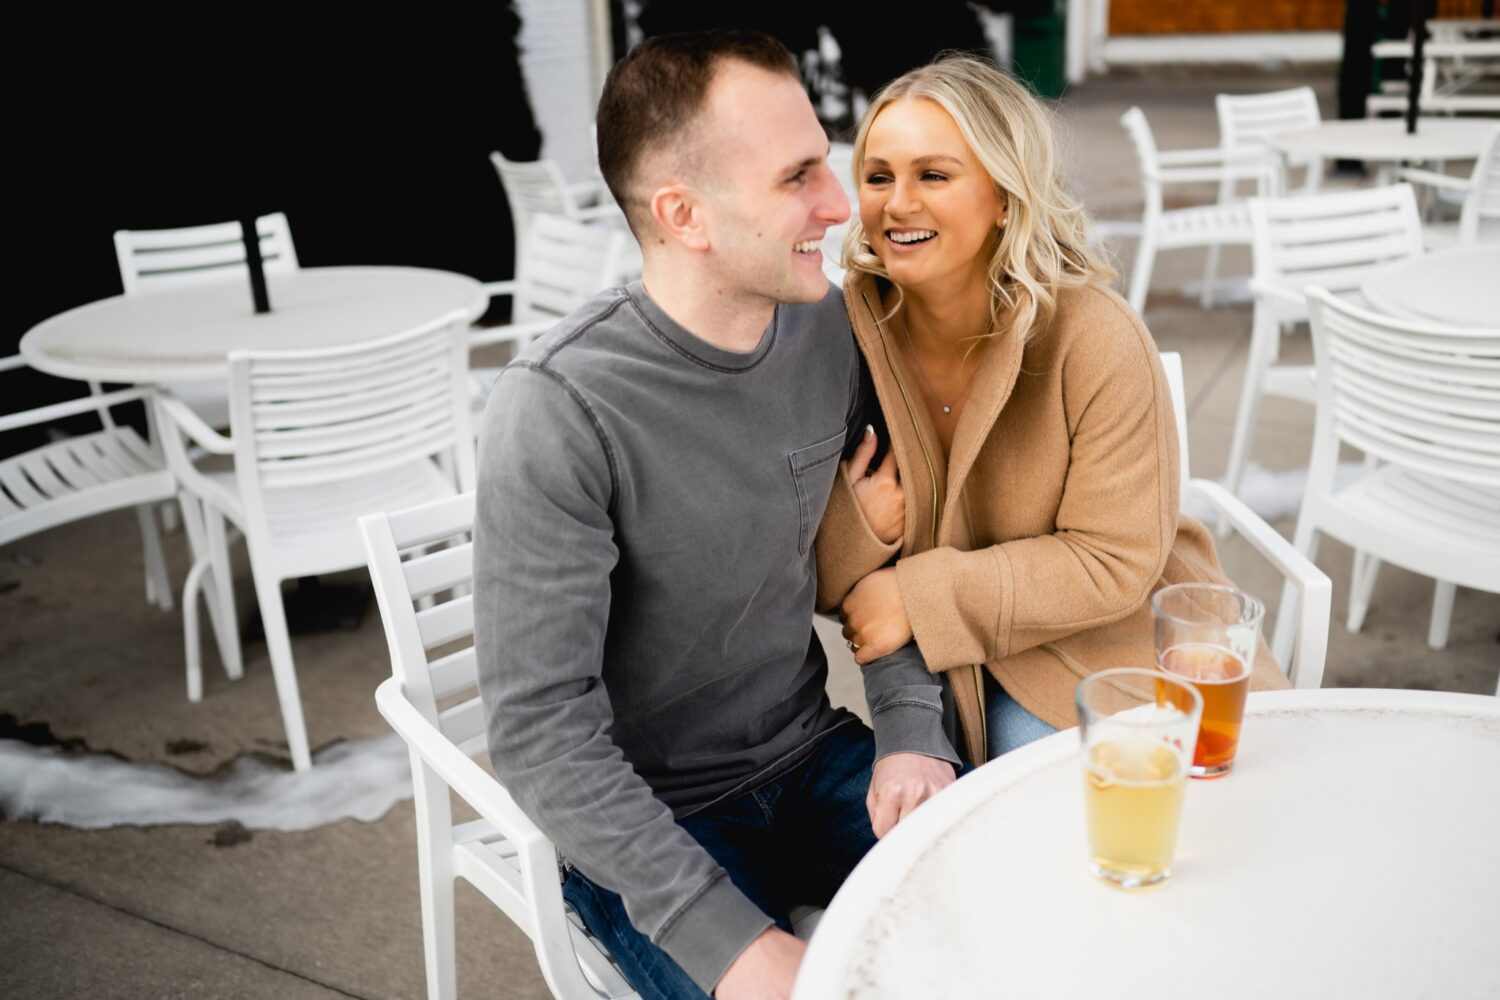 engagement photos at our favorite bar